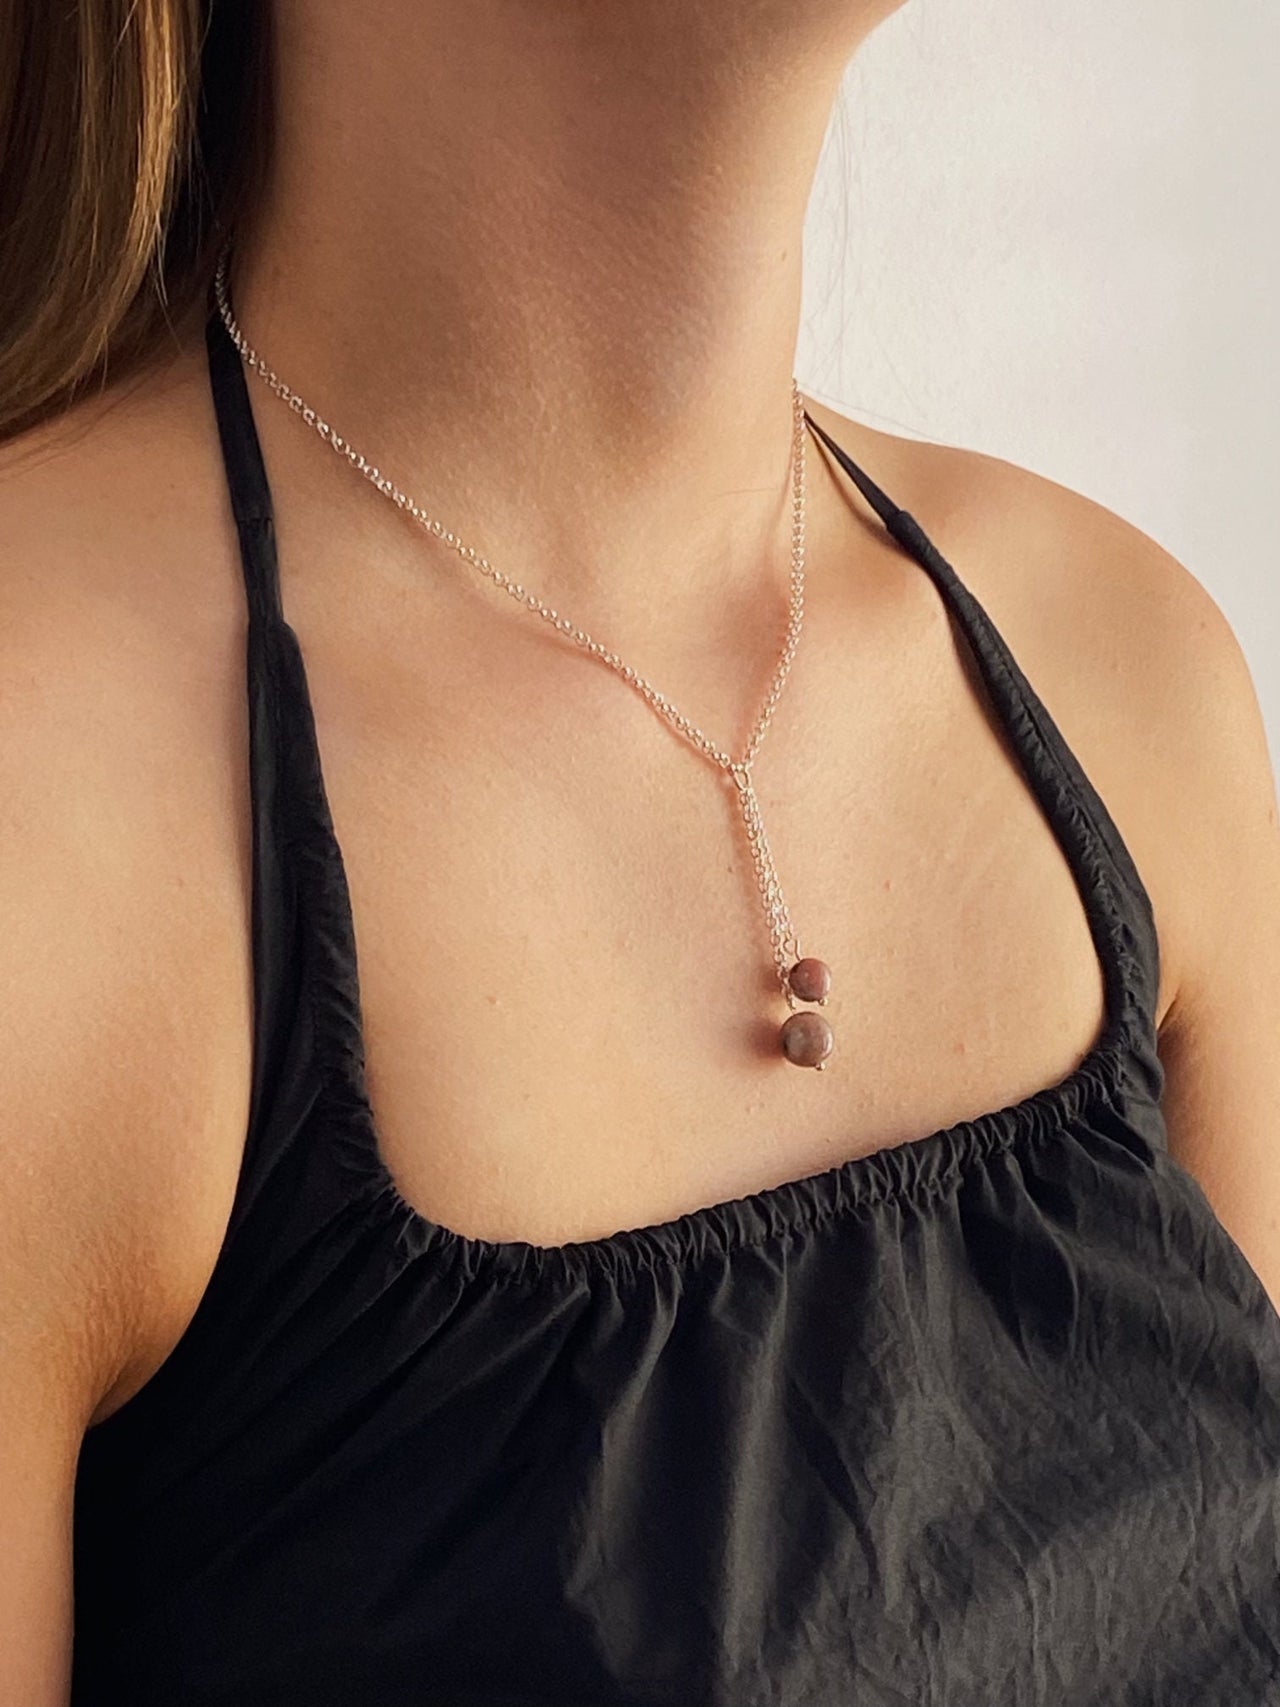 Sterling Silver Cherry Blossom Agate Necklace - Empaness